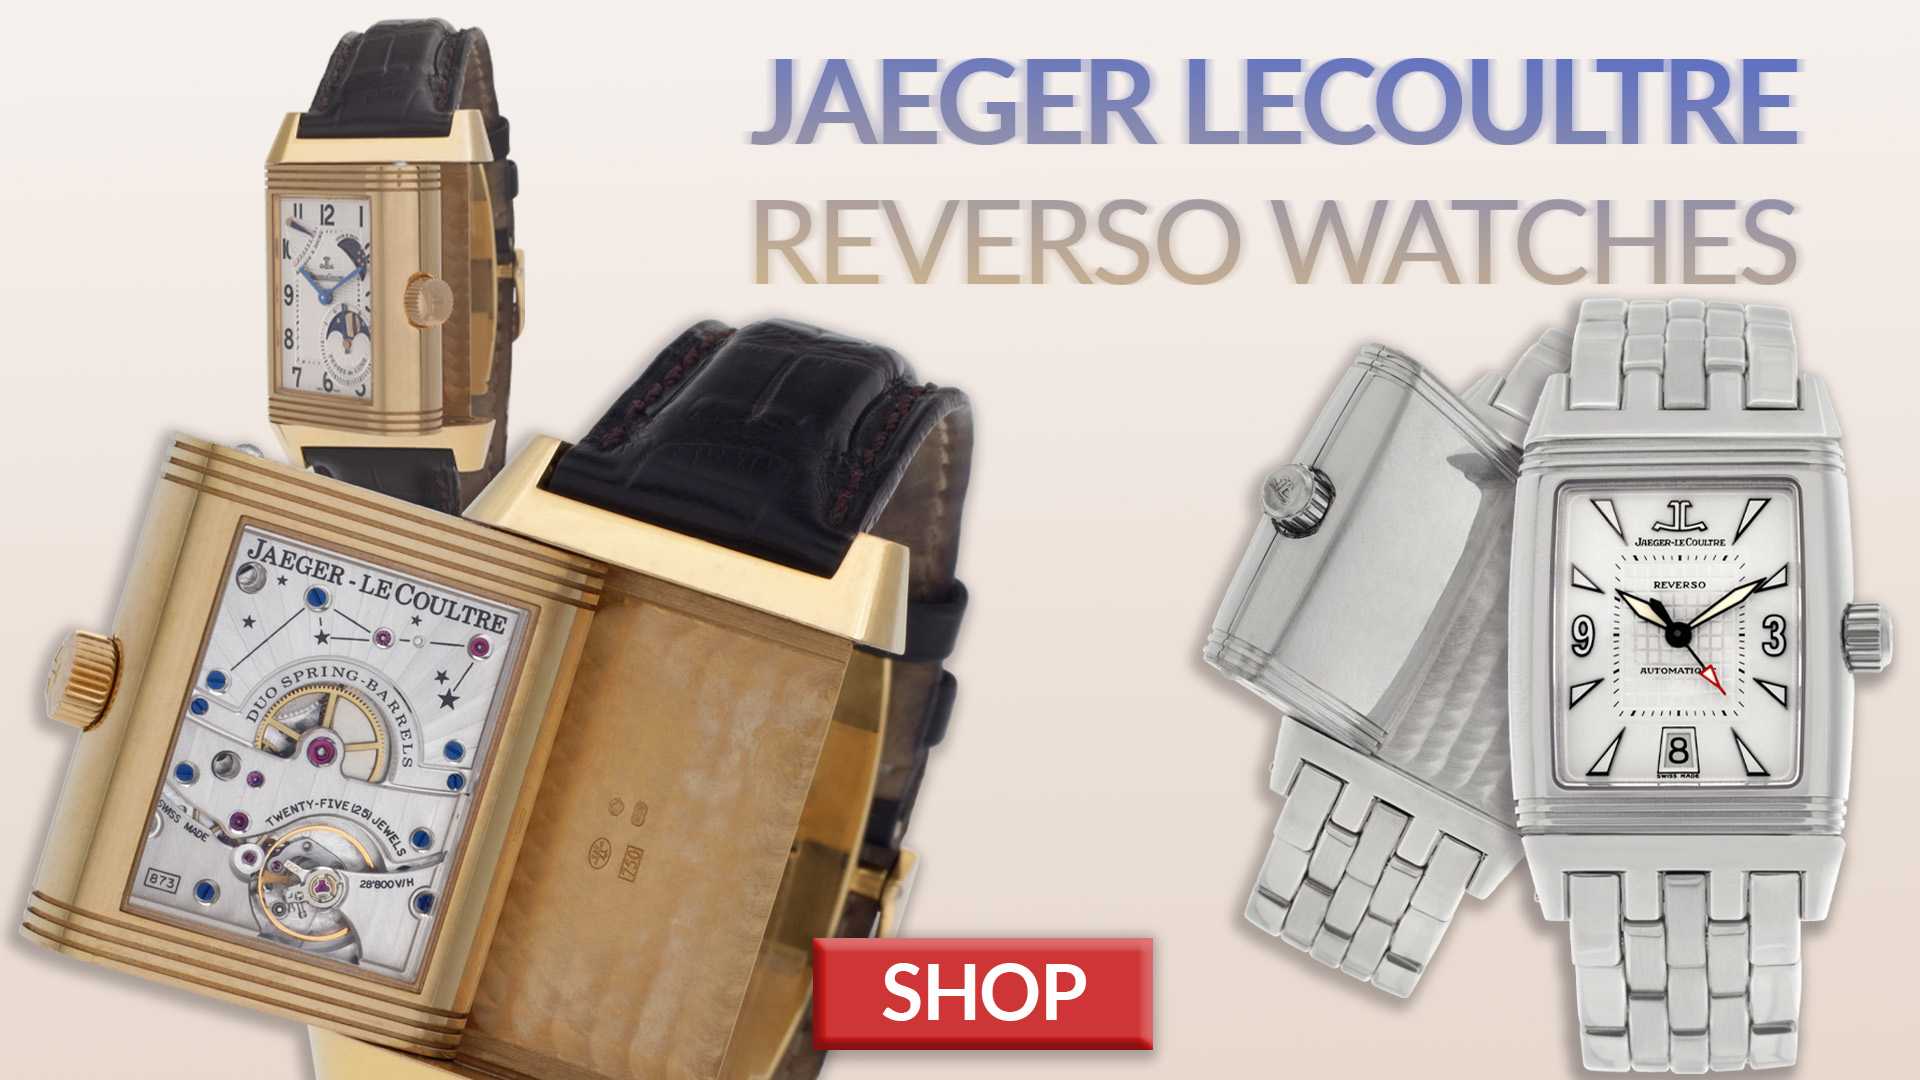 Pre-Owned Certified Used Jaeger LeCoulture Watches Header